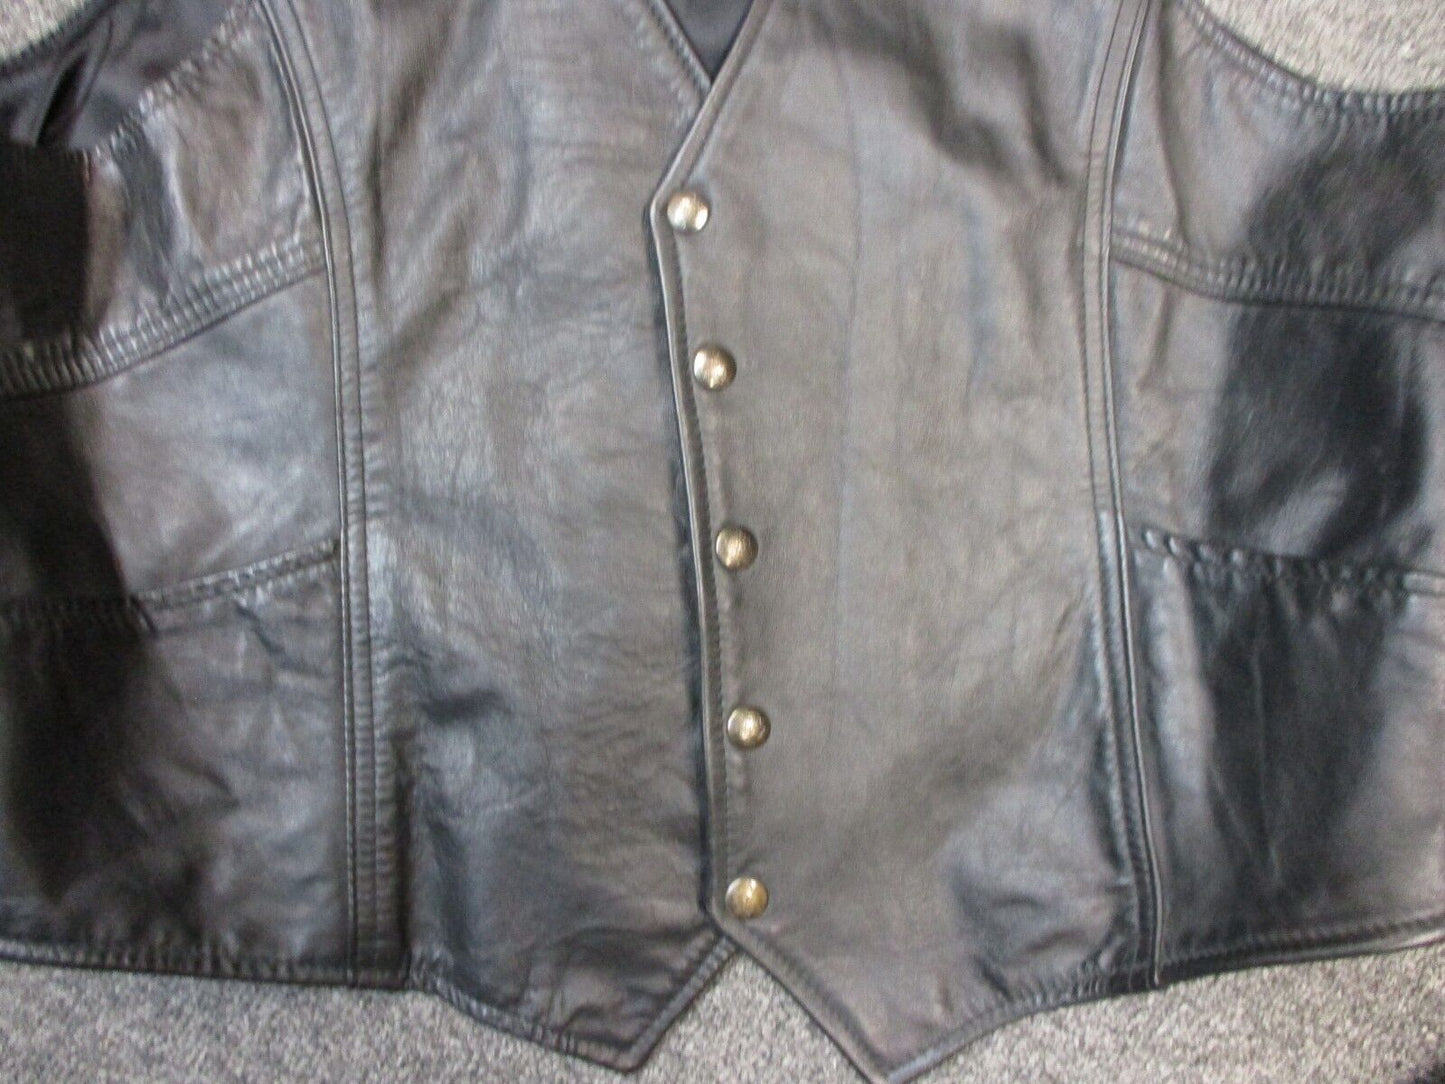 Ladies Size 2 Leather Vest Snap Button Front with two side pockets.